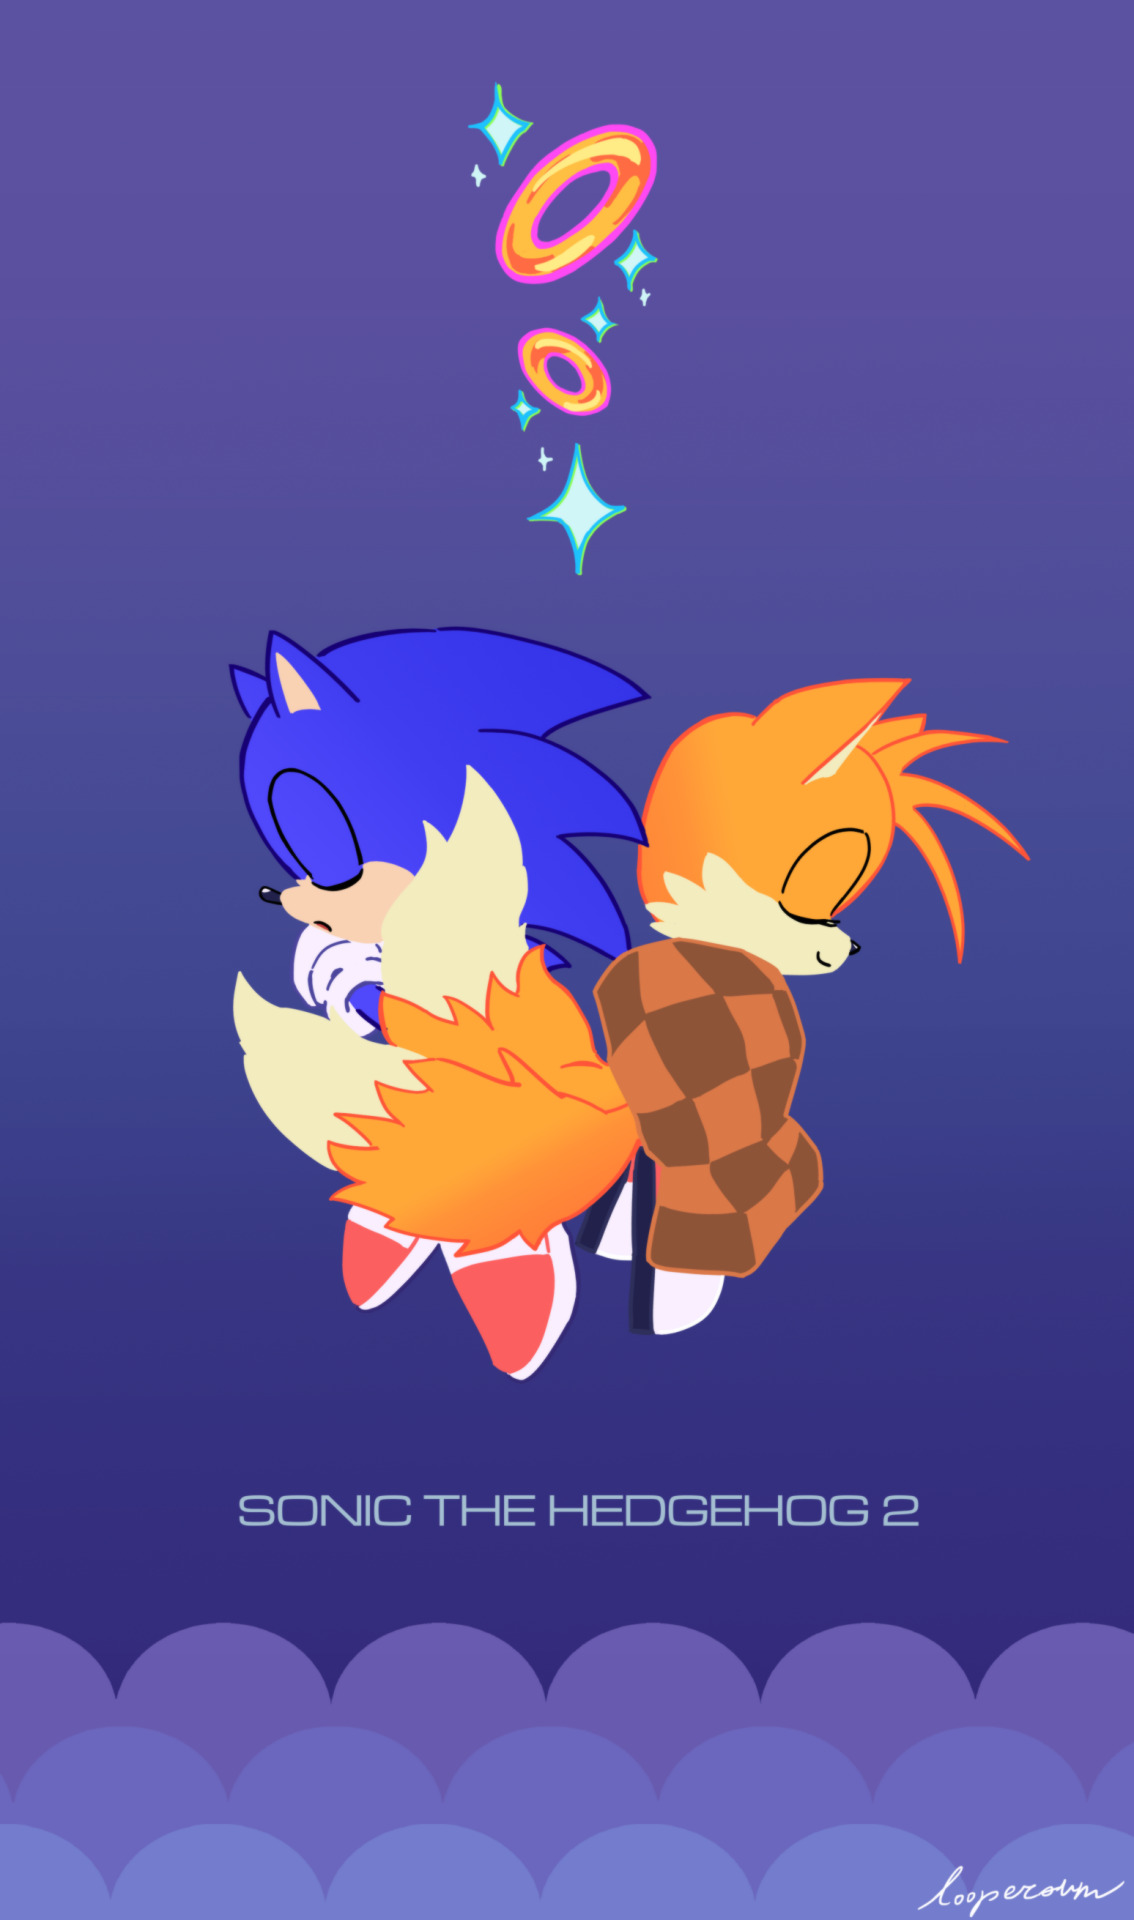 And I thought, maybe being weird isnt so bad #sonic #sonic the hedgehog  #sonic movie 2  #sonic movie spoilers  #sonic movie 2 spoilers #tails #miles tails prower  #tails the fox #fanart